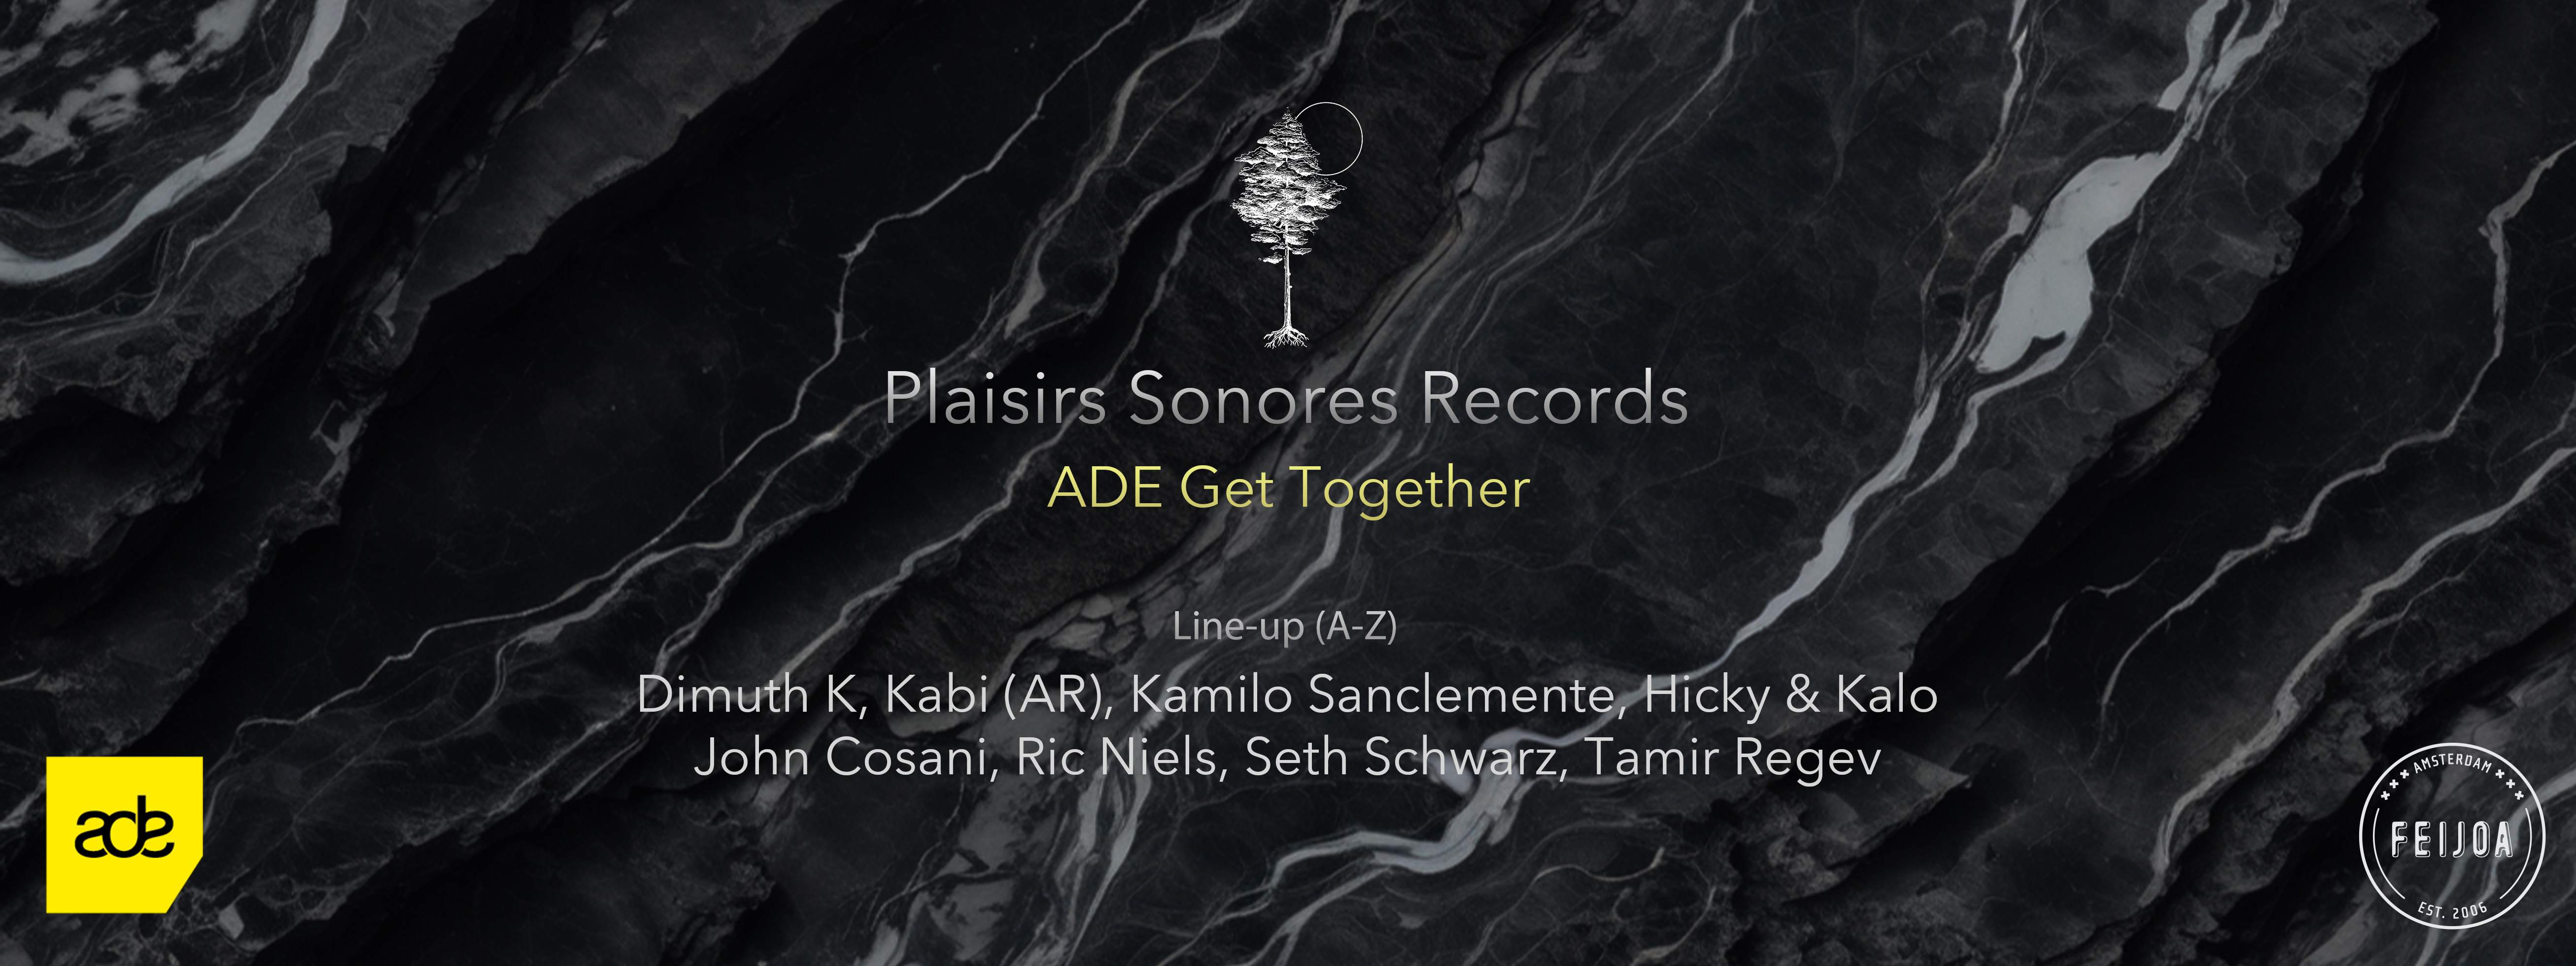 Plaisirs Sonores Records ADE Get Together - Página frontal